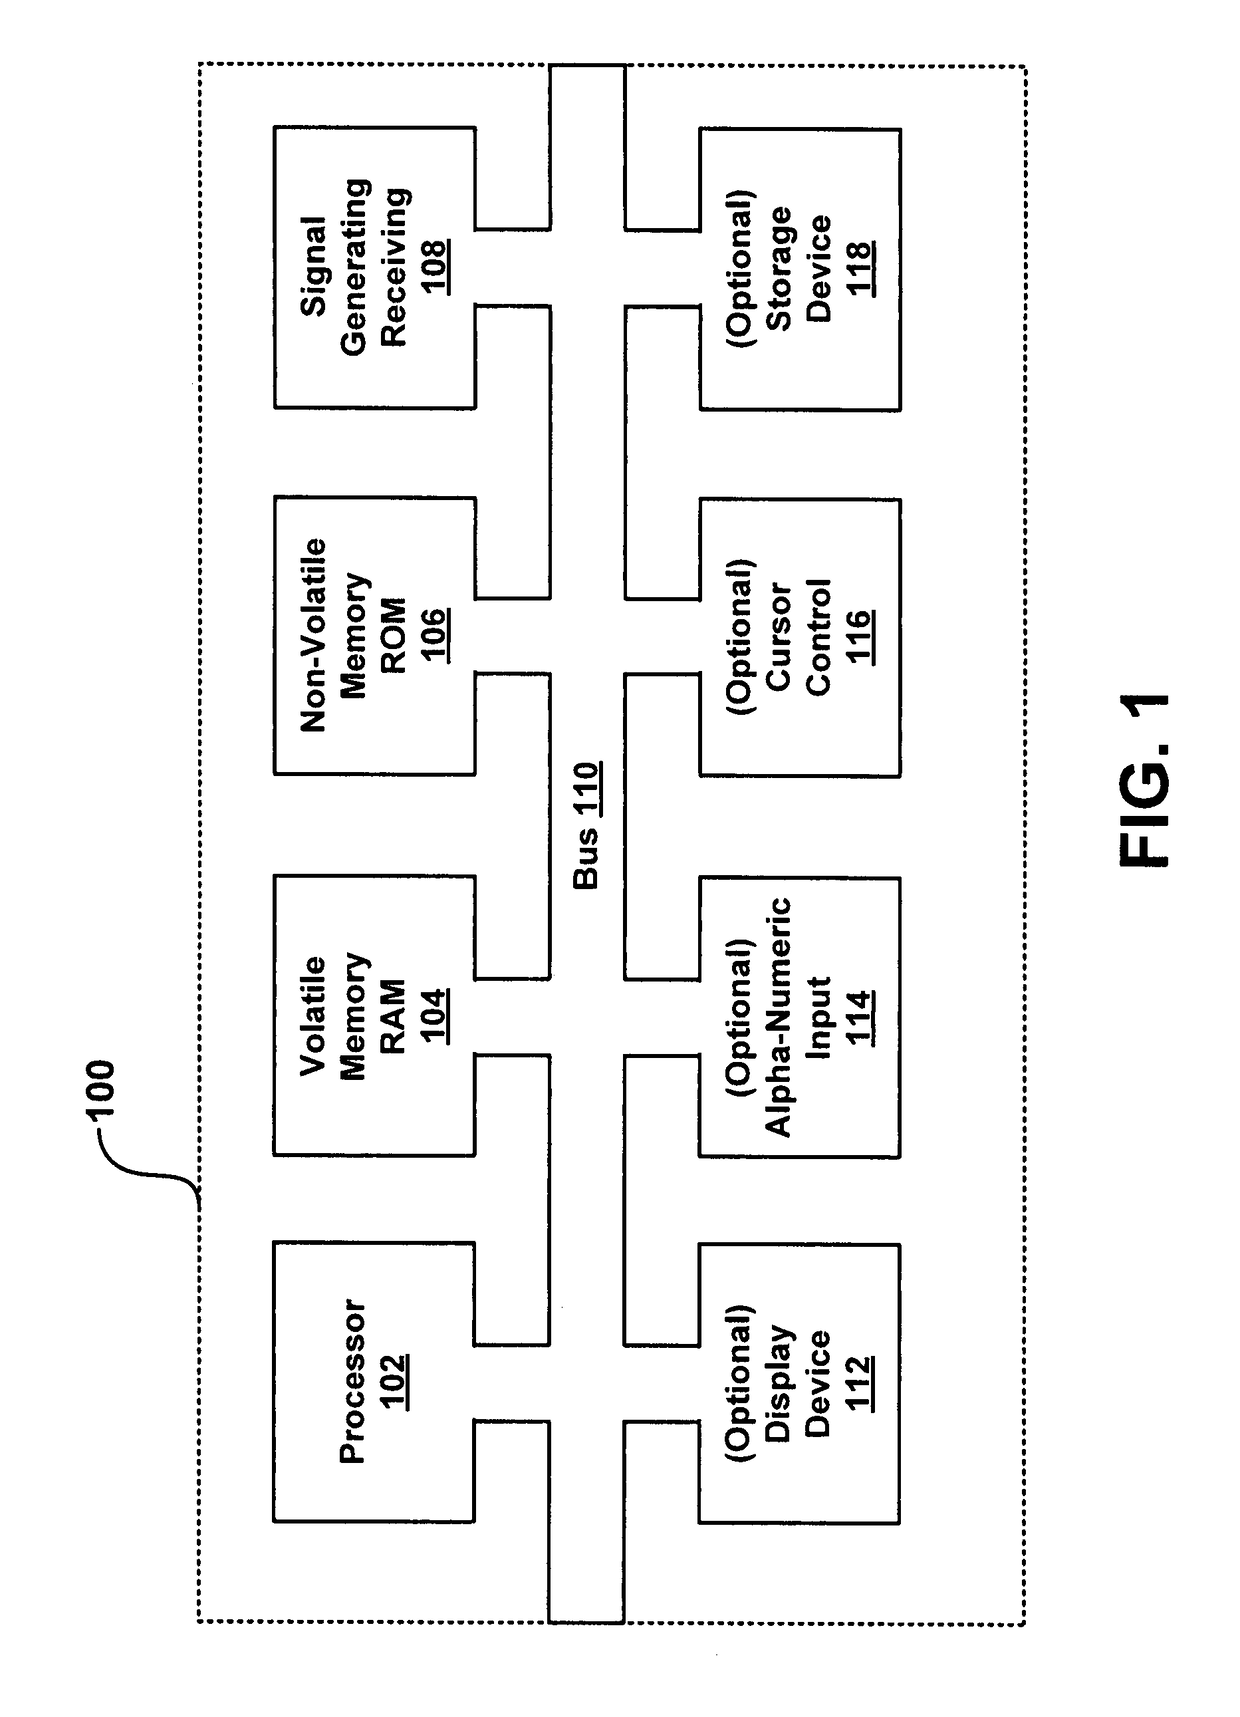 Method for providing status information pertaining to an asset